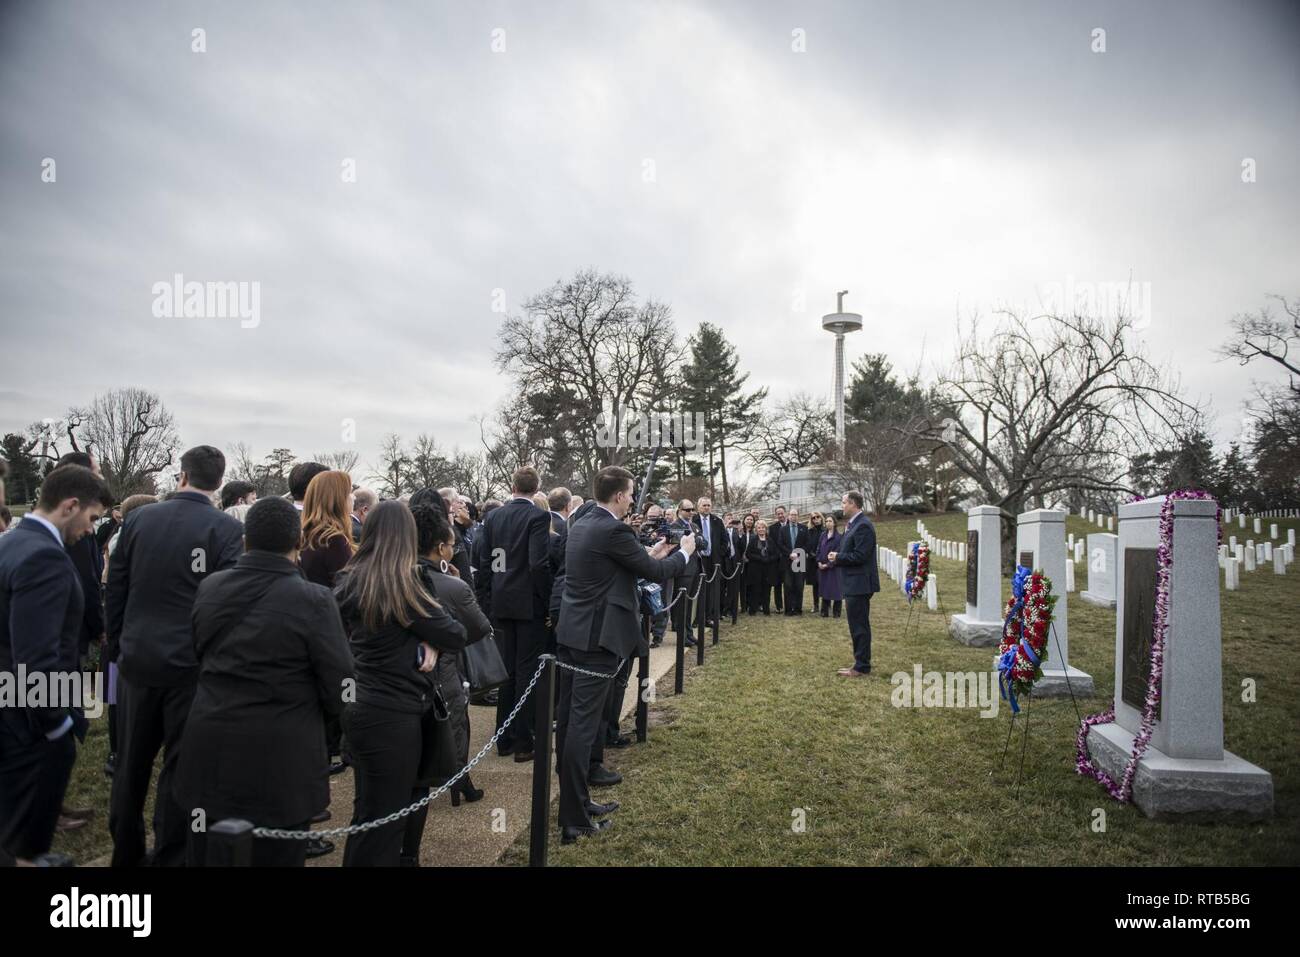 NASA Administrator Jim Bridenstine (center) gives remarks aftera wreath-laying ceremony at the Challenger and Columbia memorial as part of the NASA Day of Remembrance at Arlington National Cemetery, Arlington, Virginia, Feb. 7, 2019. This annual event pays tribute “to the crews of Apollo 1 and space shuttles Challenger and Columbia, as well as other NASA colleagues who lost their lives while furthering the cause of exploration and discovery,” according to NASA. Stock Photo